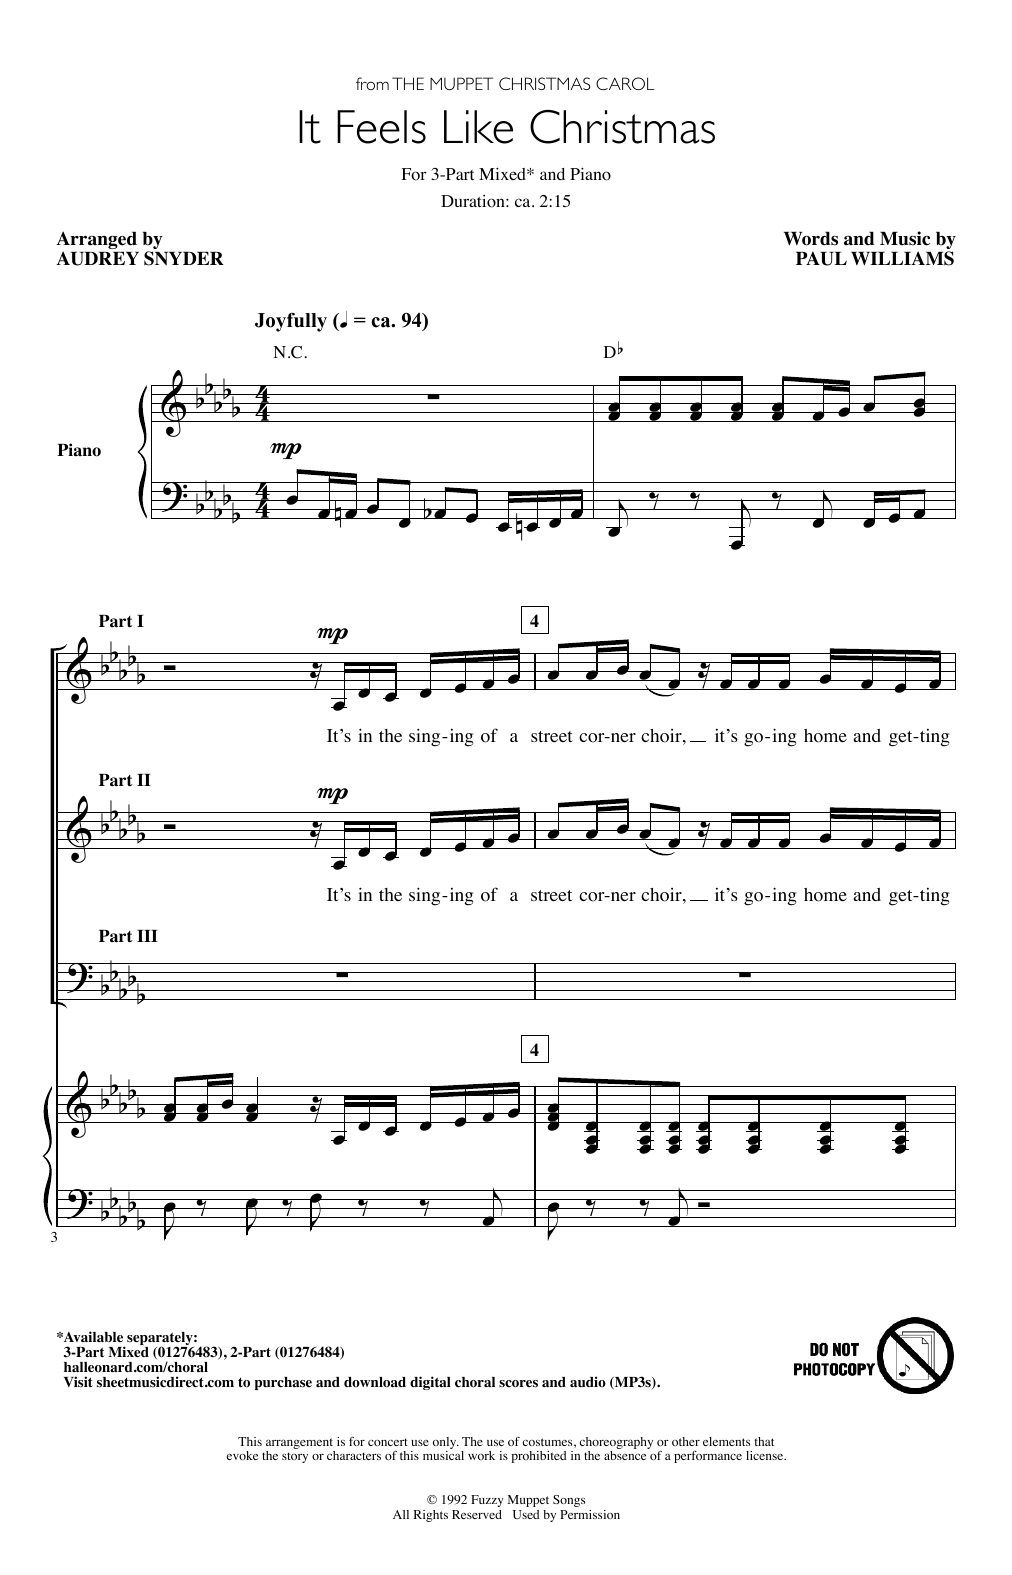 Paul Williams It Feels Like Christmas (from The Muppet Christmas Carol) (arr. Audrey Snyder) sheet music notes printable PDF score